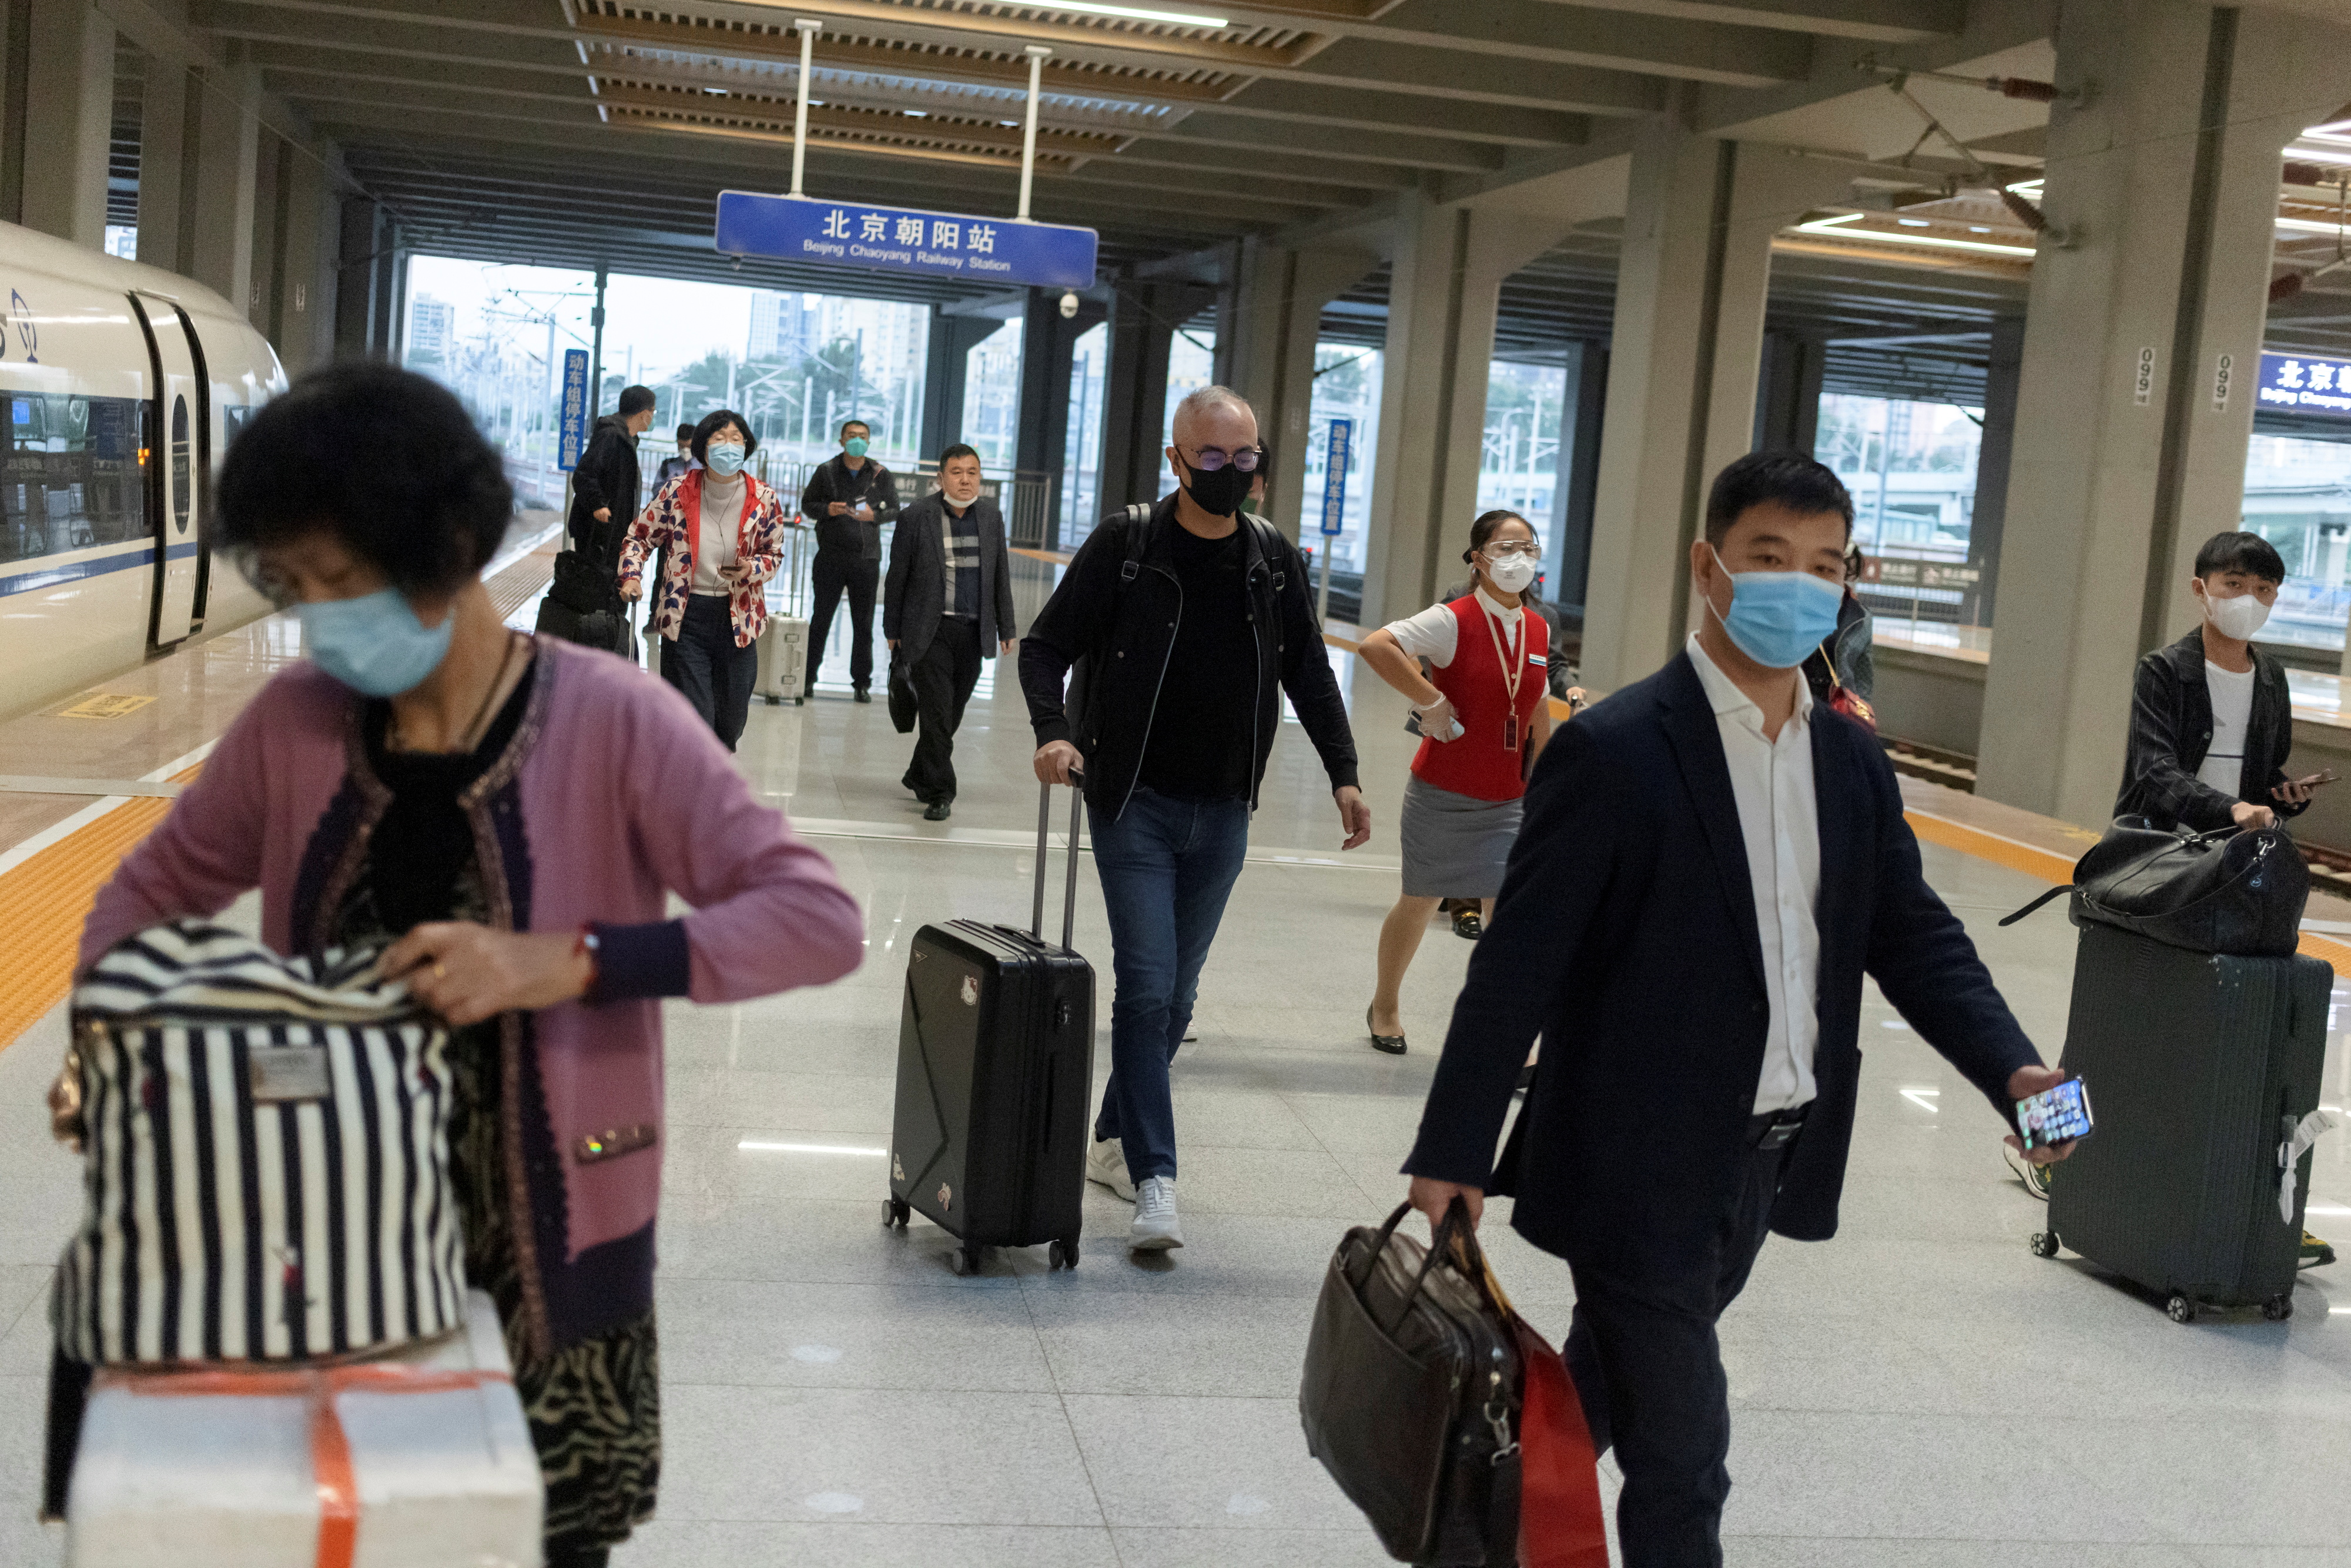 Travellers arrive at a train station ahead of China's upcoming Golden Week holiday following the coronavirus disease (COVID-19) outbreak, in Beijing